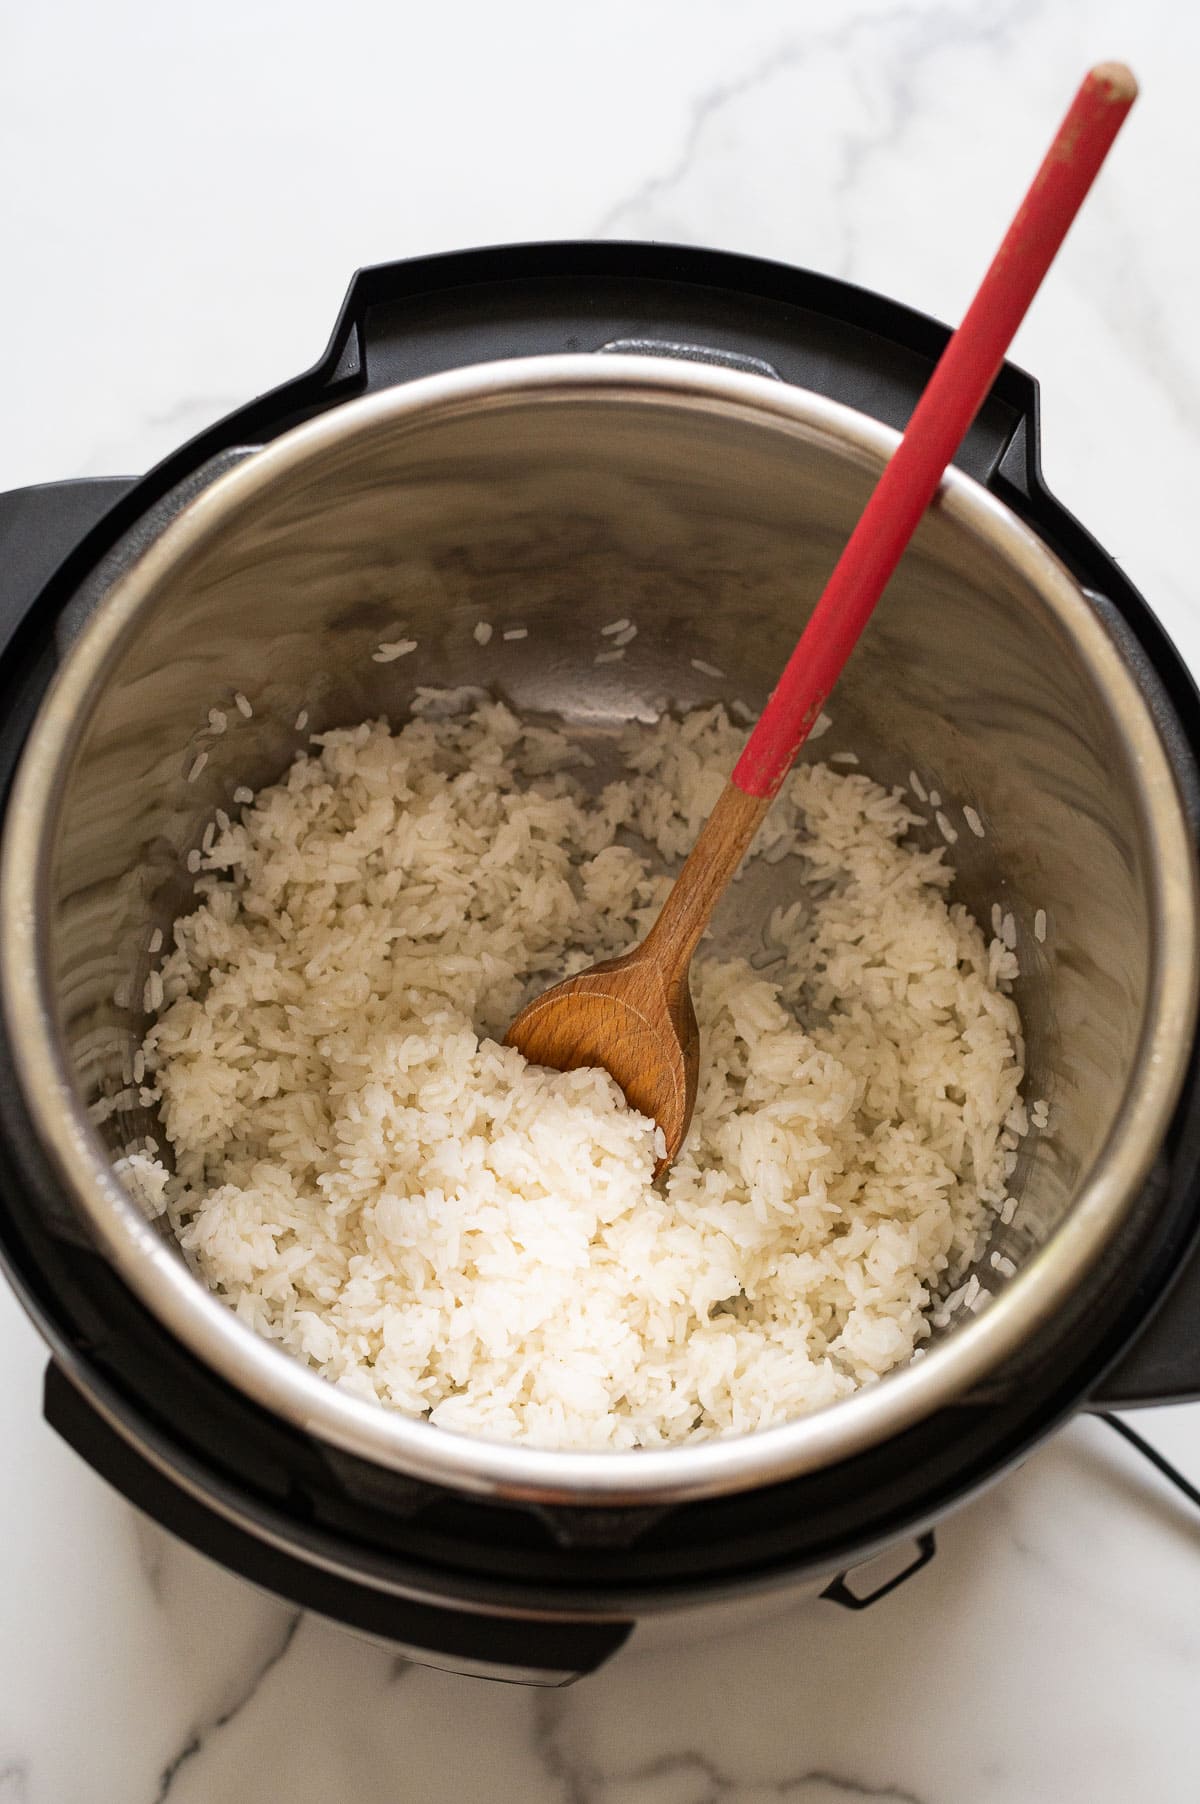 Instant pot white rice with wooden spoon in it.